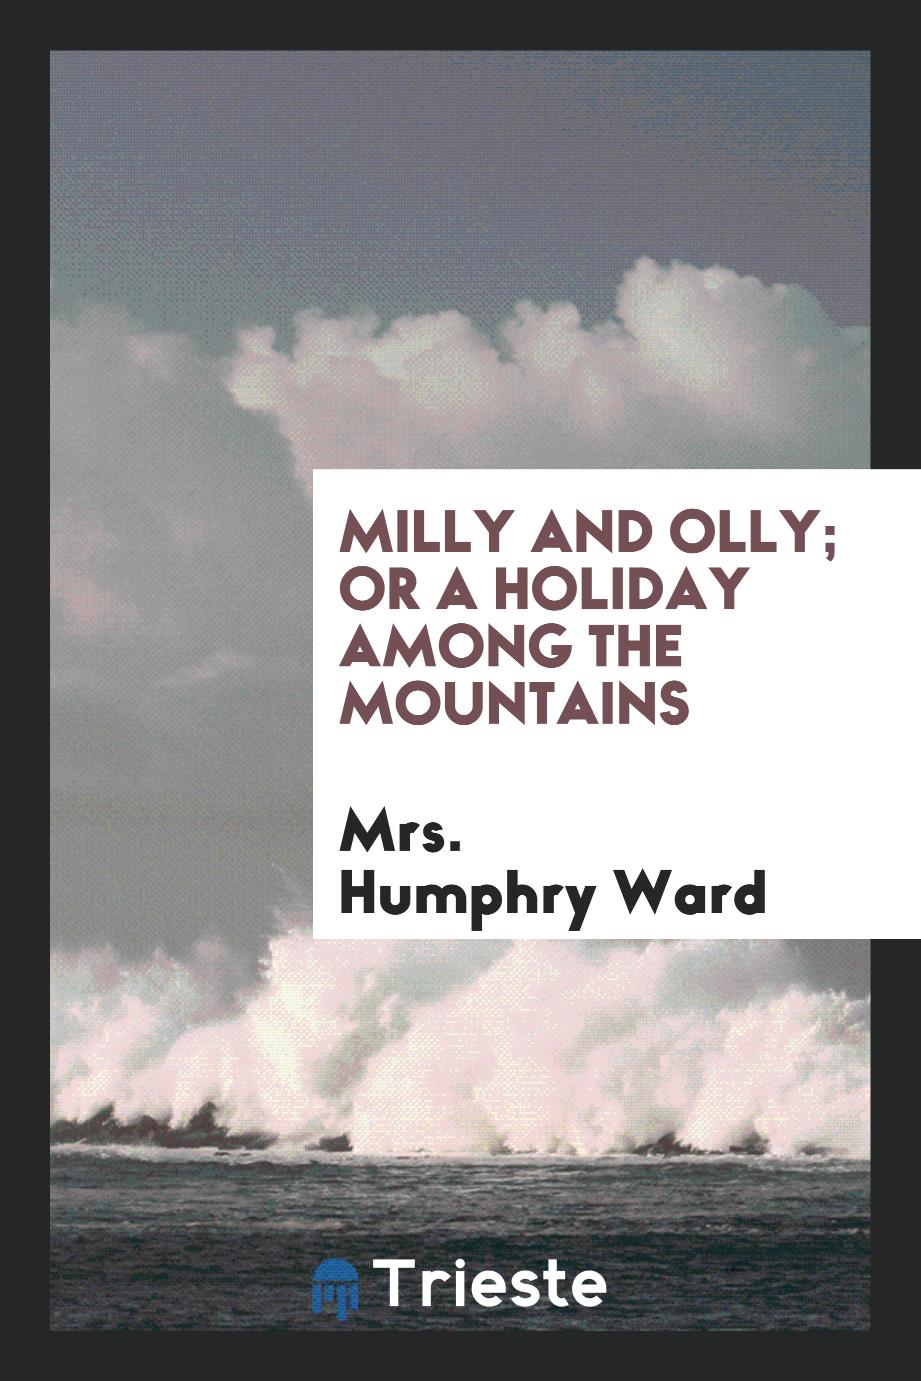 Milly and Olly; or a holiday among the mountains